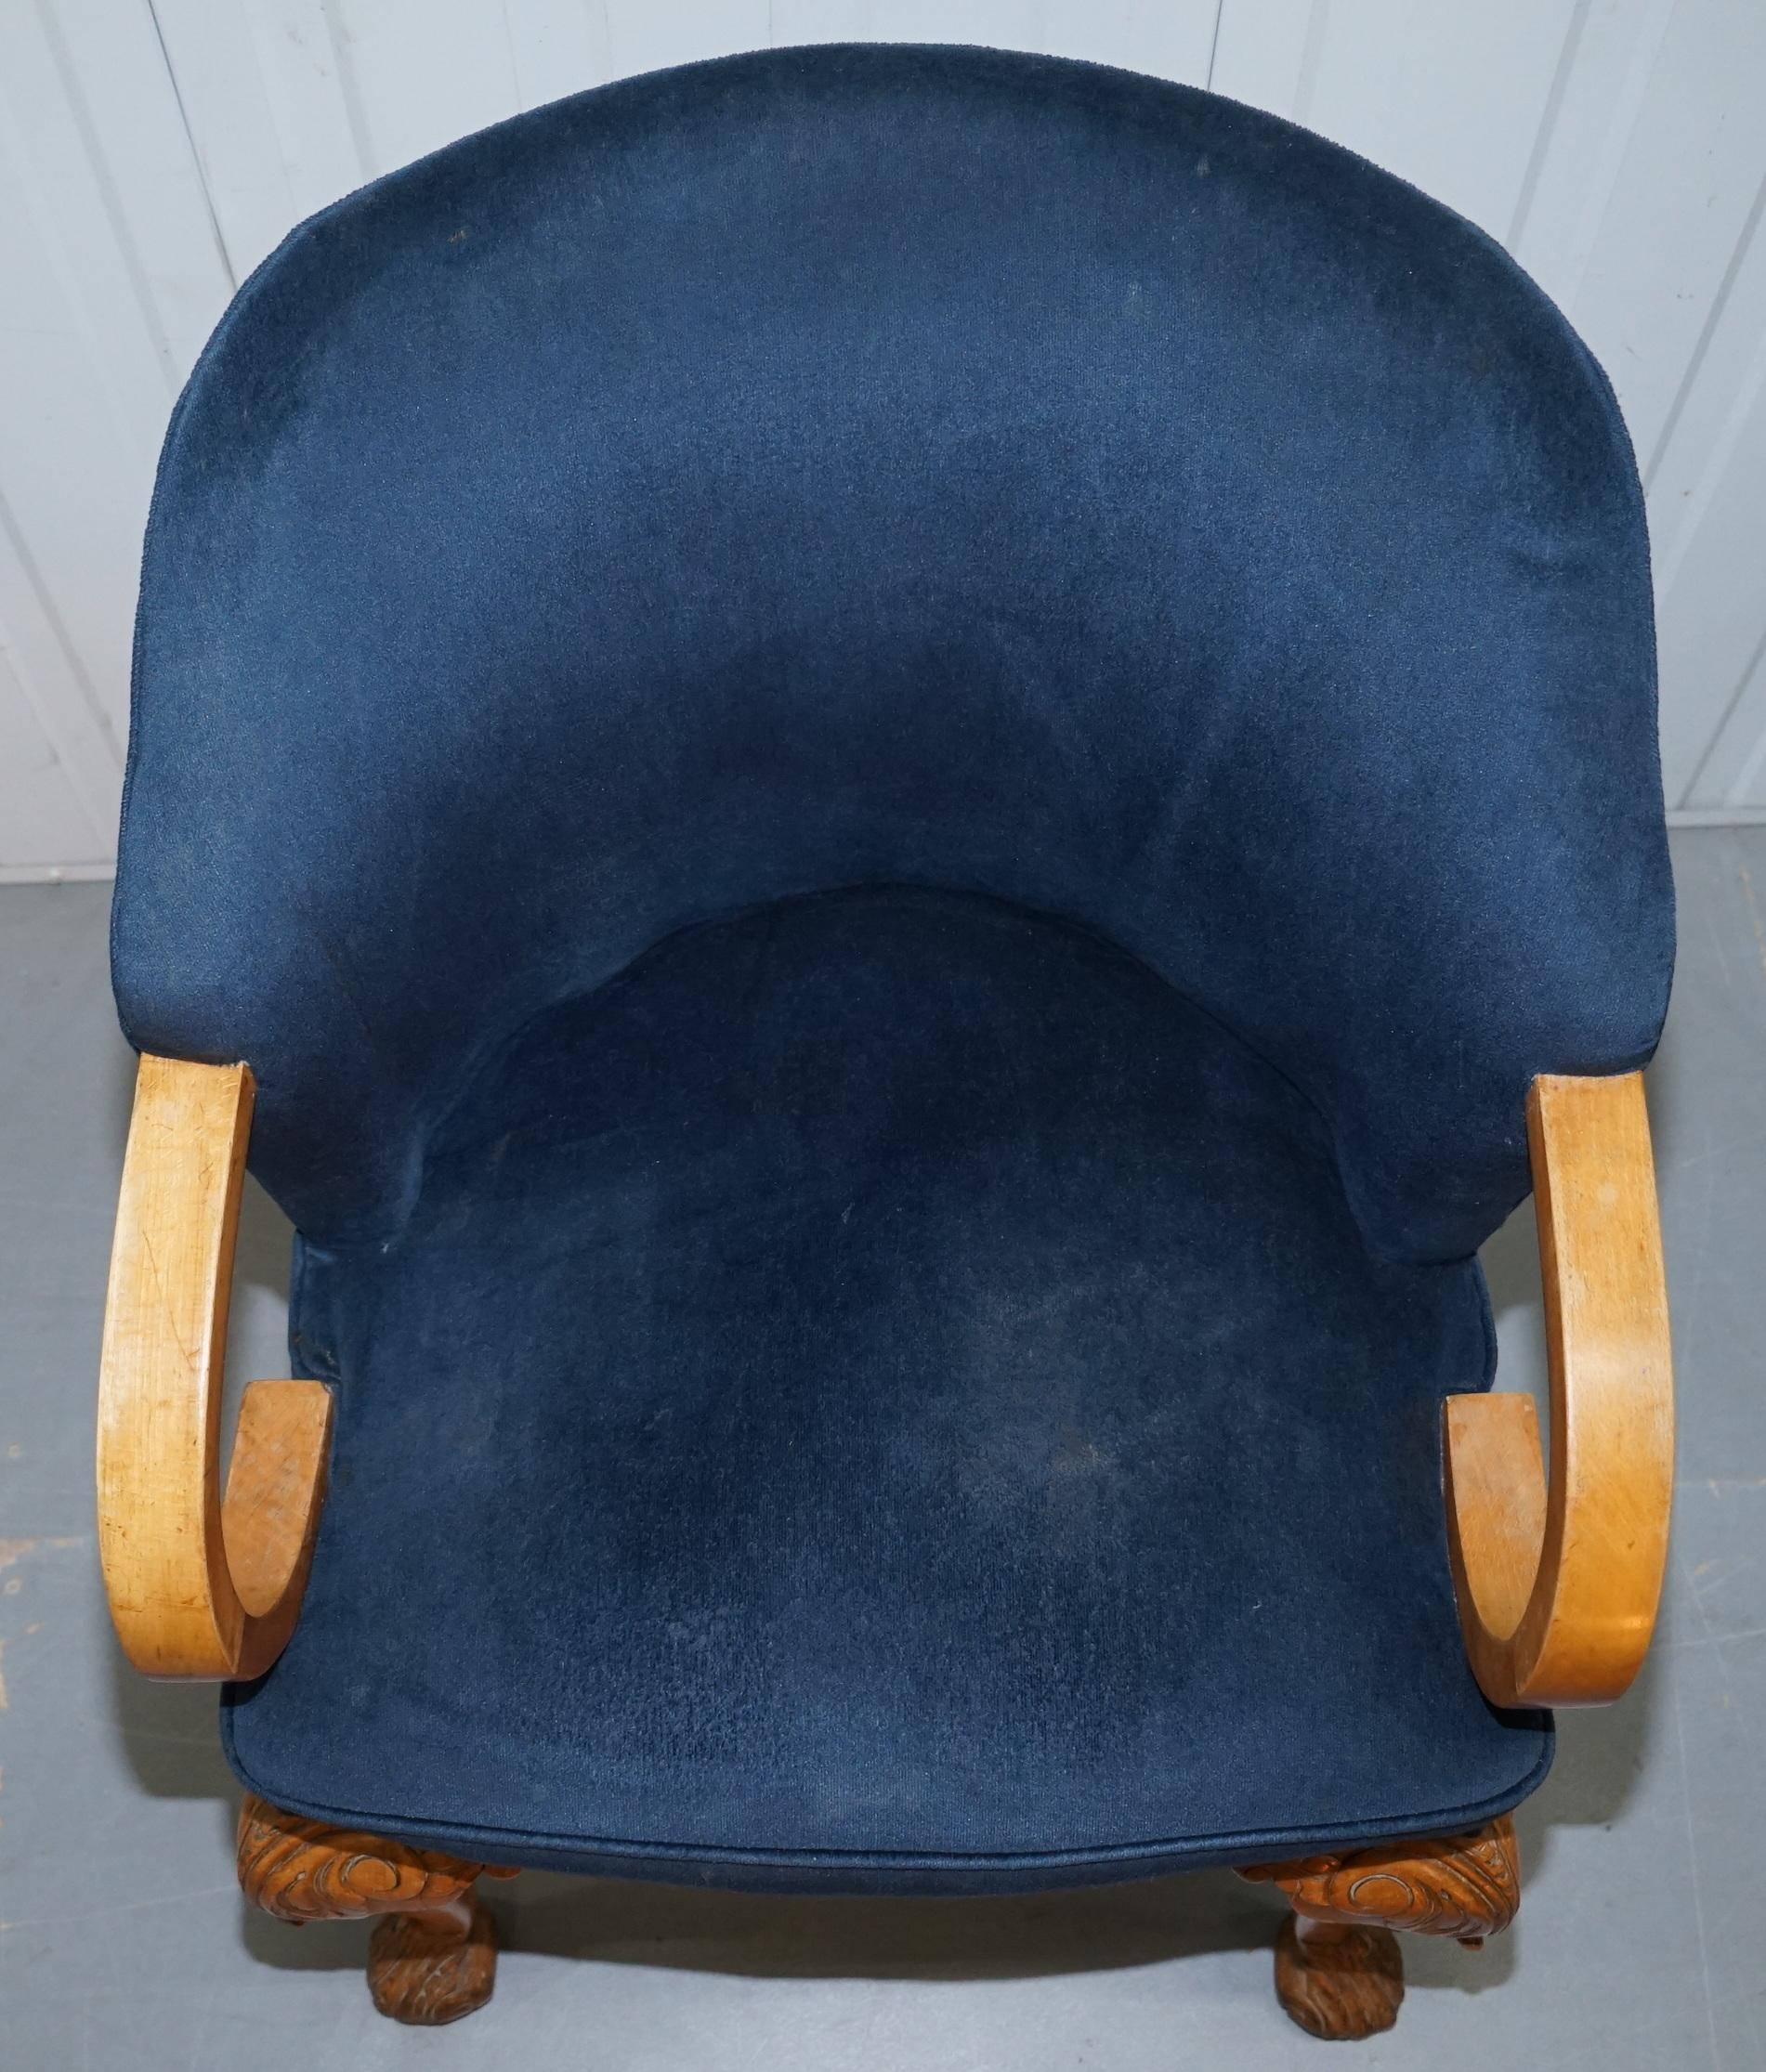 20th Century Pair of 1930s Art Deco Tub Armchairs Carved Georgian Legs Royal Blue Upholstery